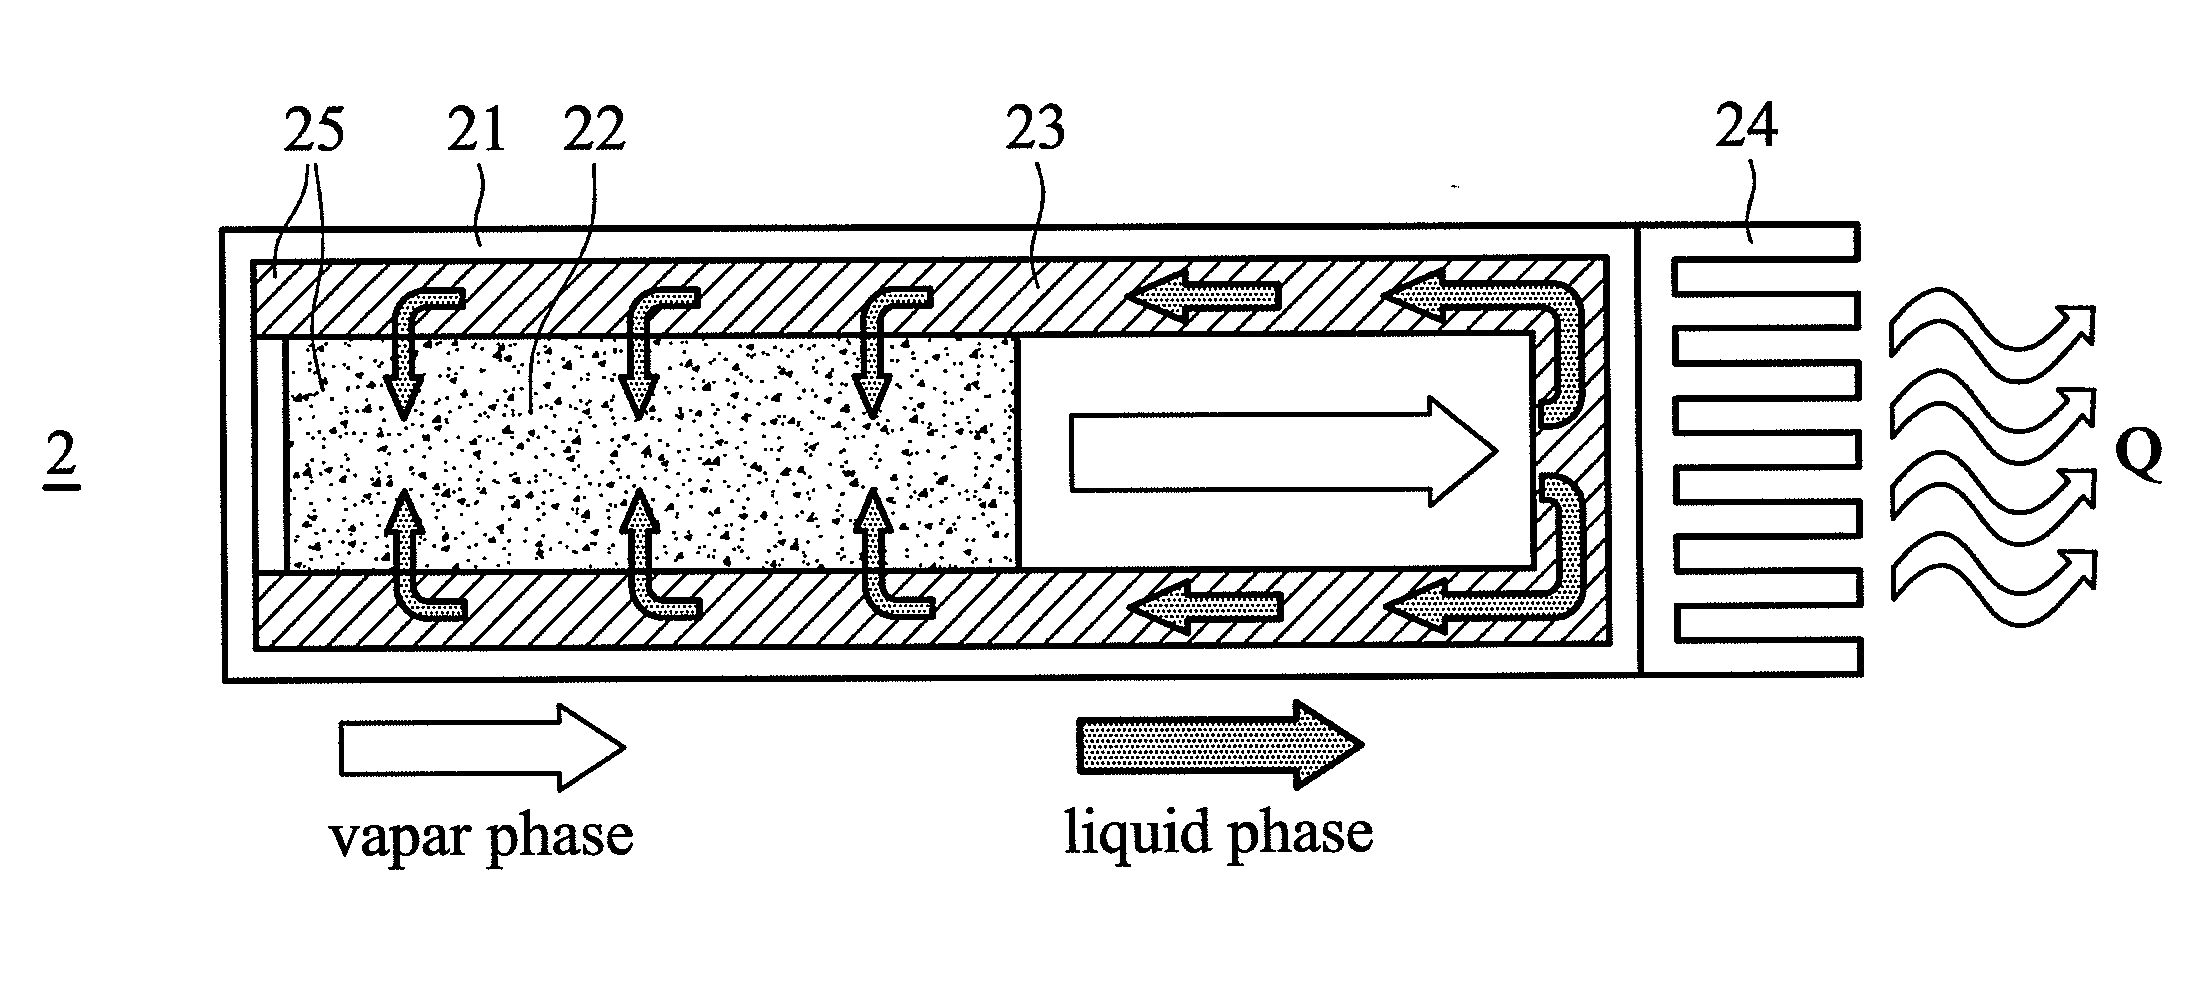 Thermal exchanging device